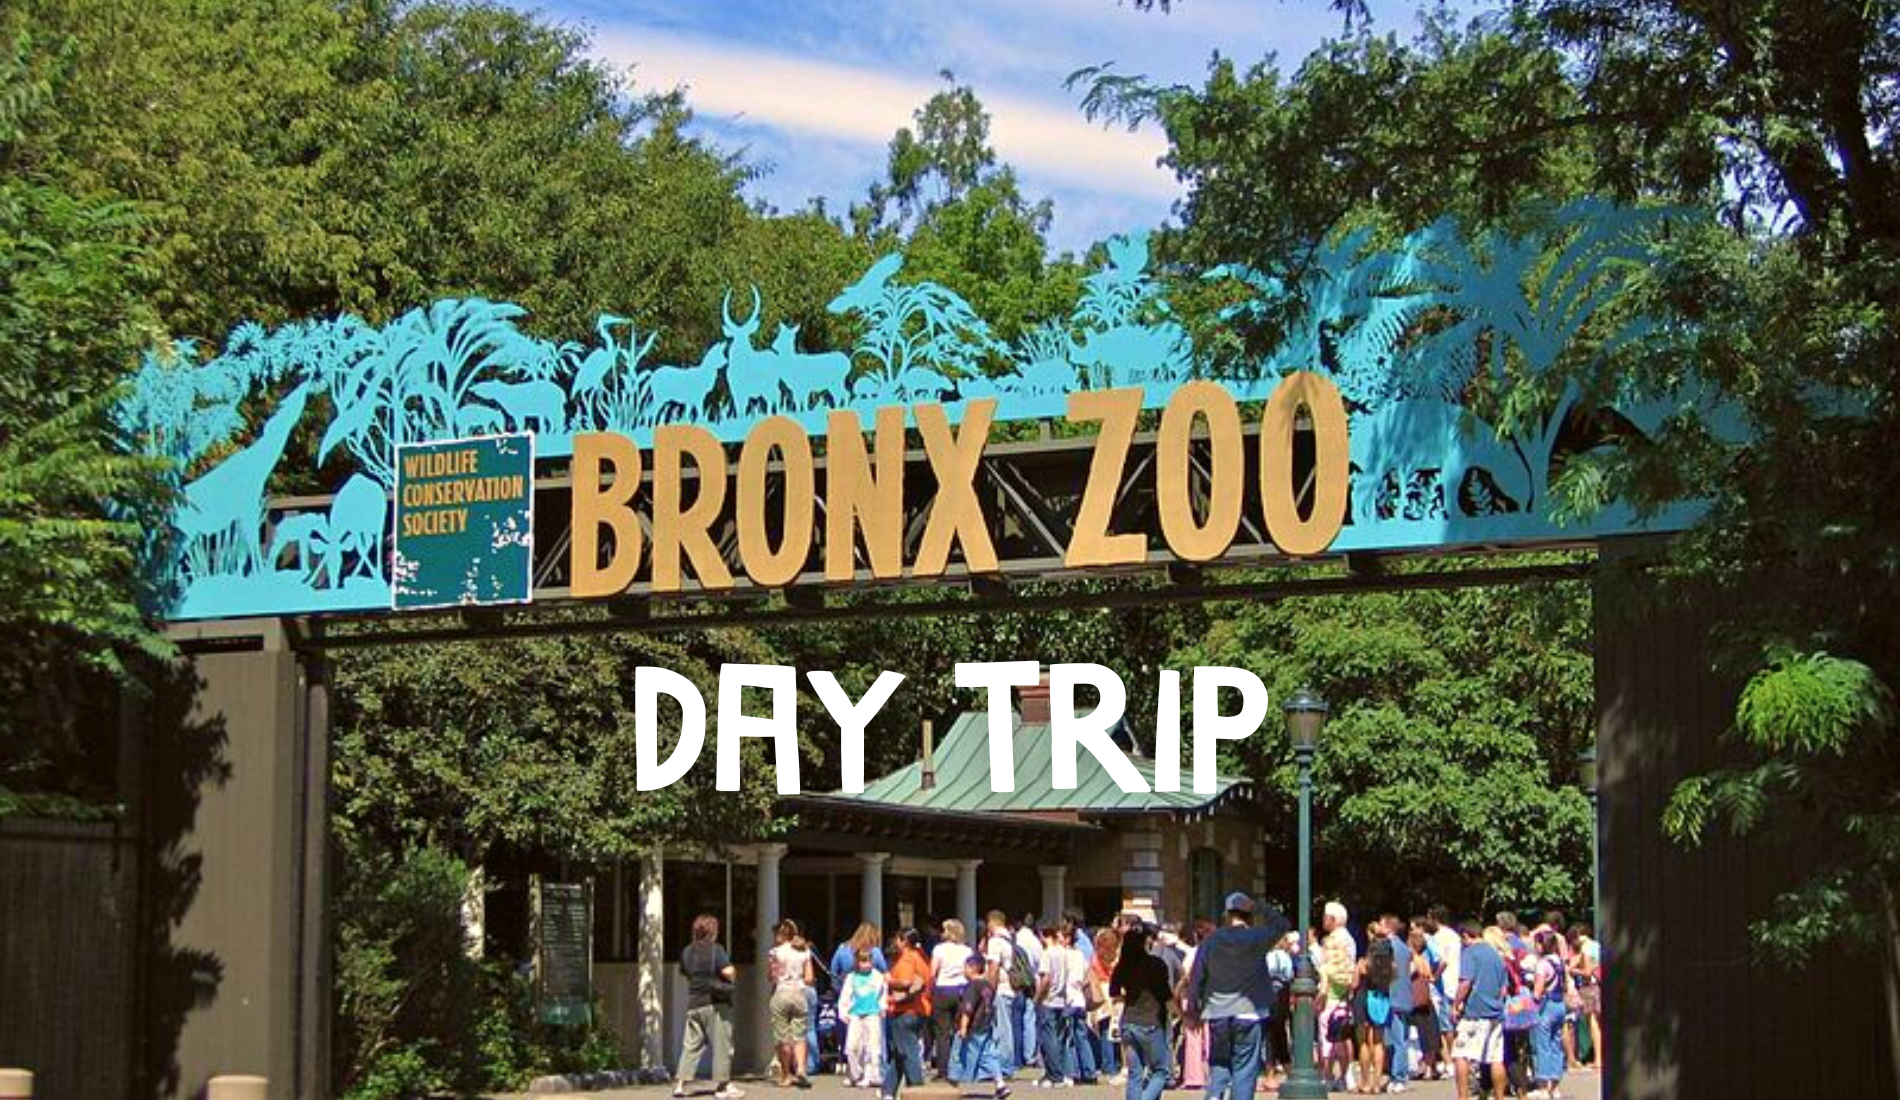 Bronx Zoo Day Trip. Front Entrance of Bronx Zoo with guests waiting in line.